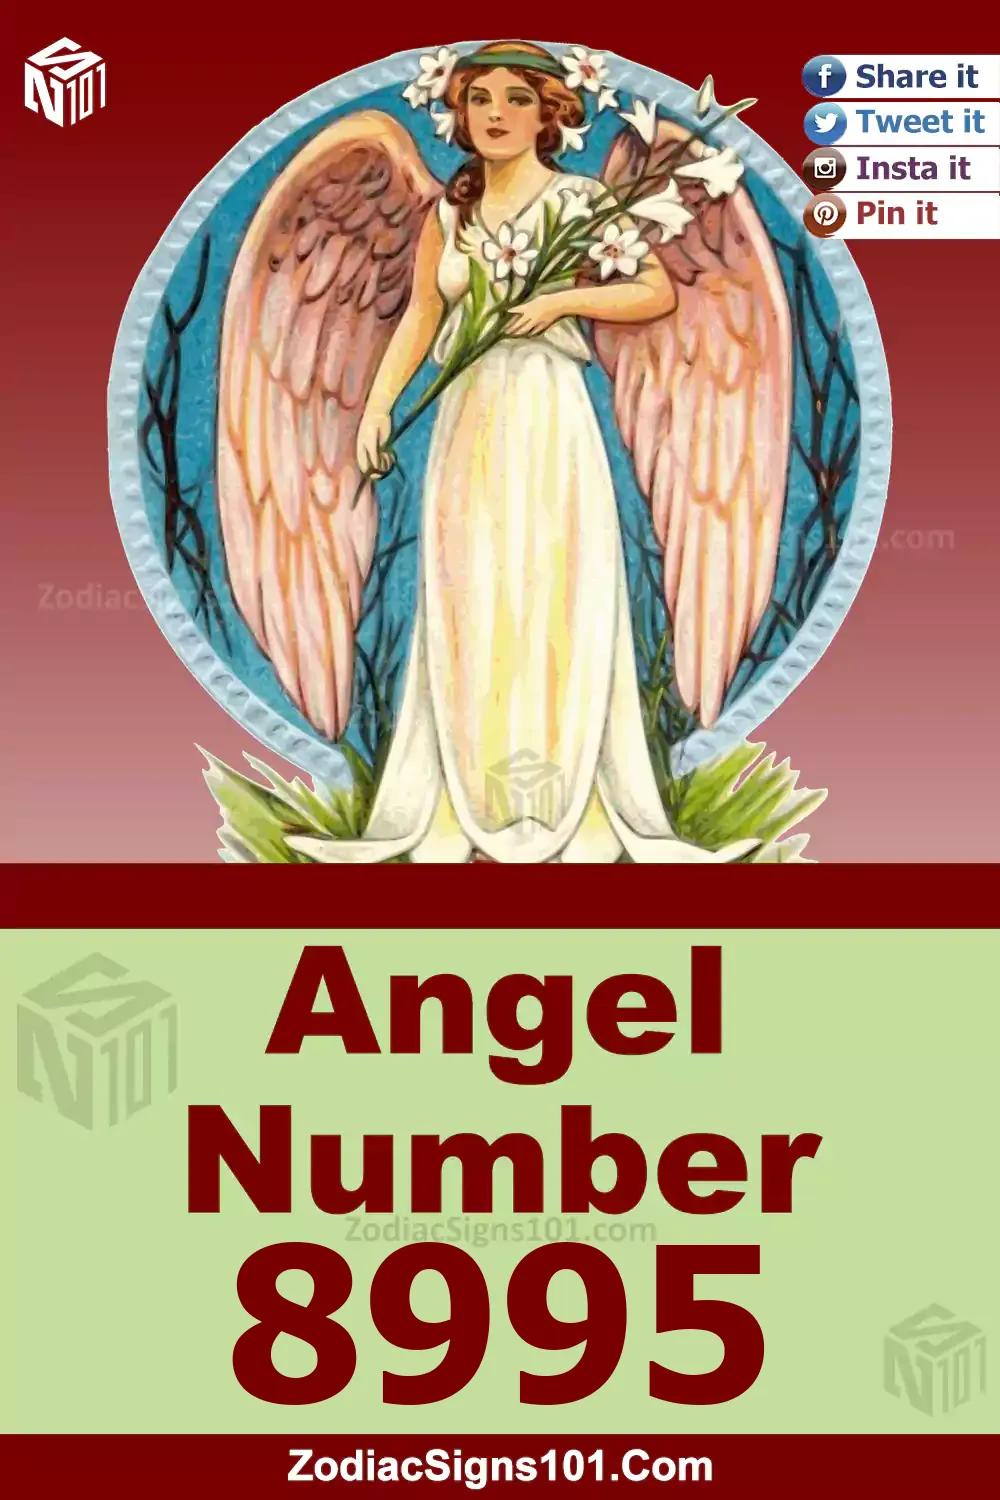 8995 Angel Number Meaning